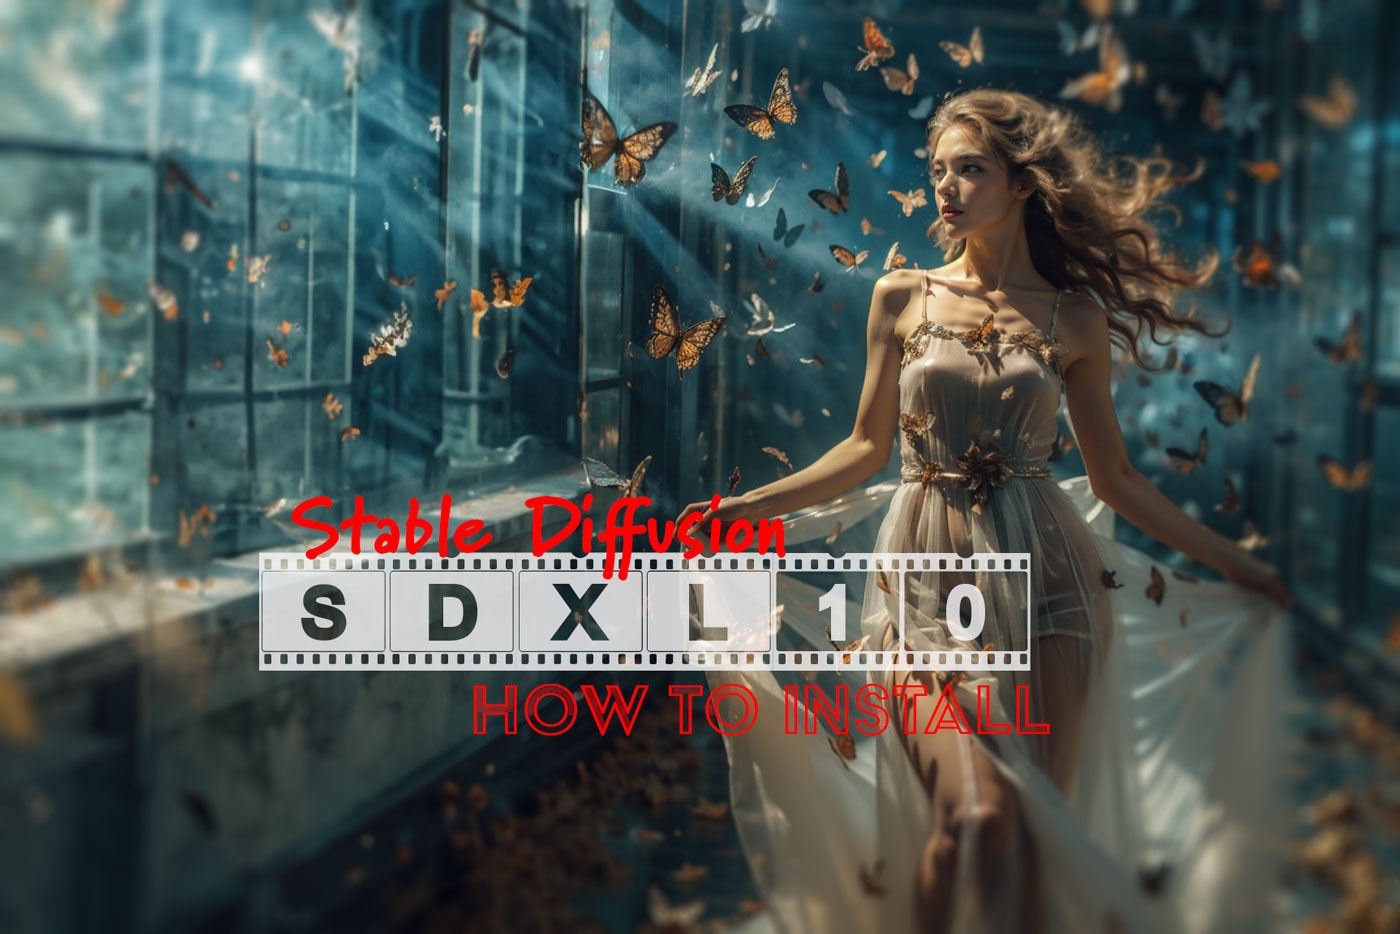 How to Install SDXL 1.0 for Automatic1111: A Step-by-Step Guide